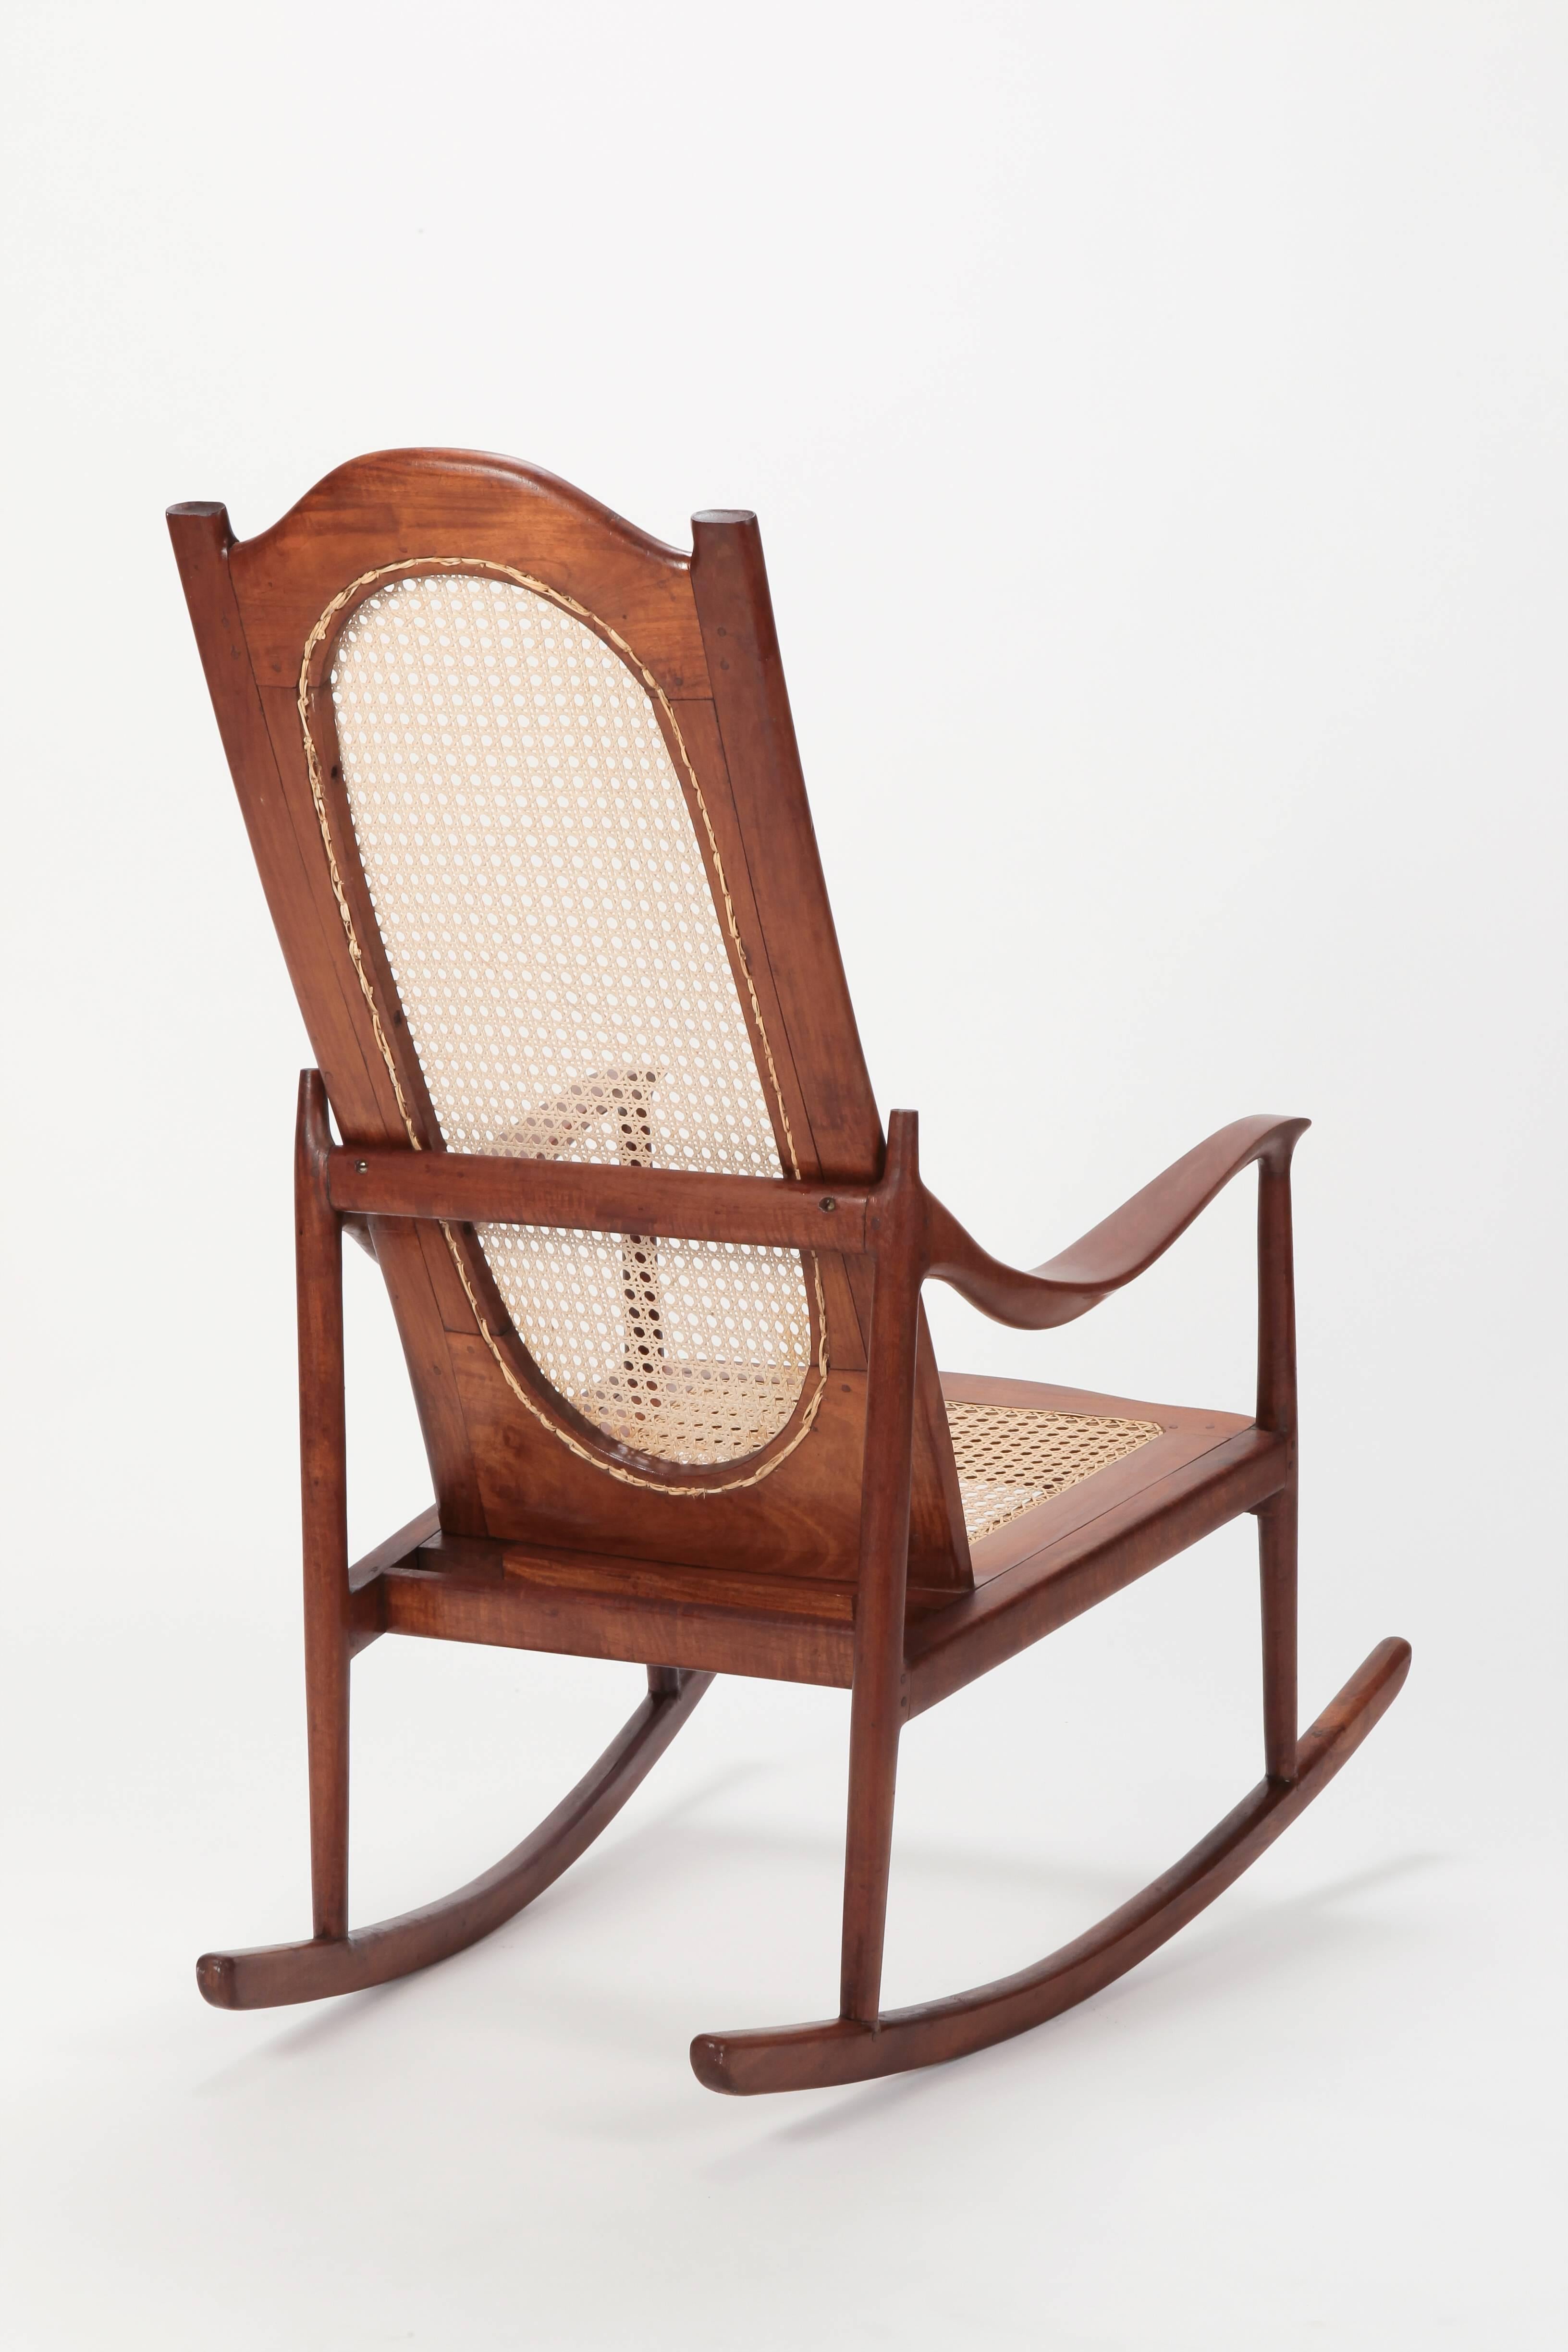 American Rocking Chair Mahogany, 1890 For Sale 2